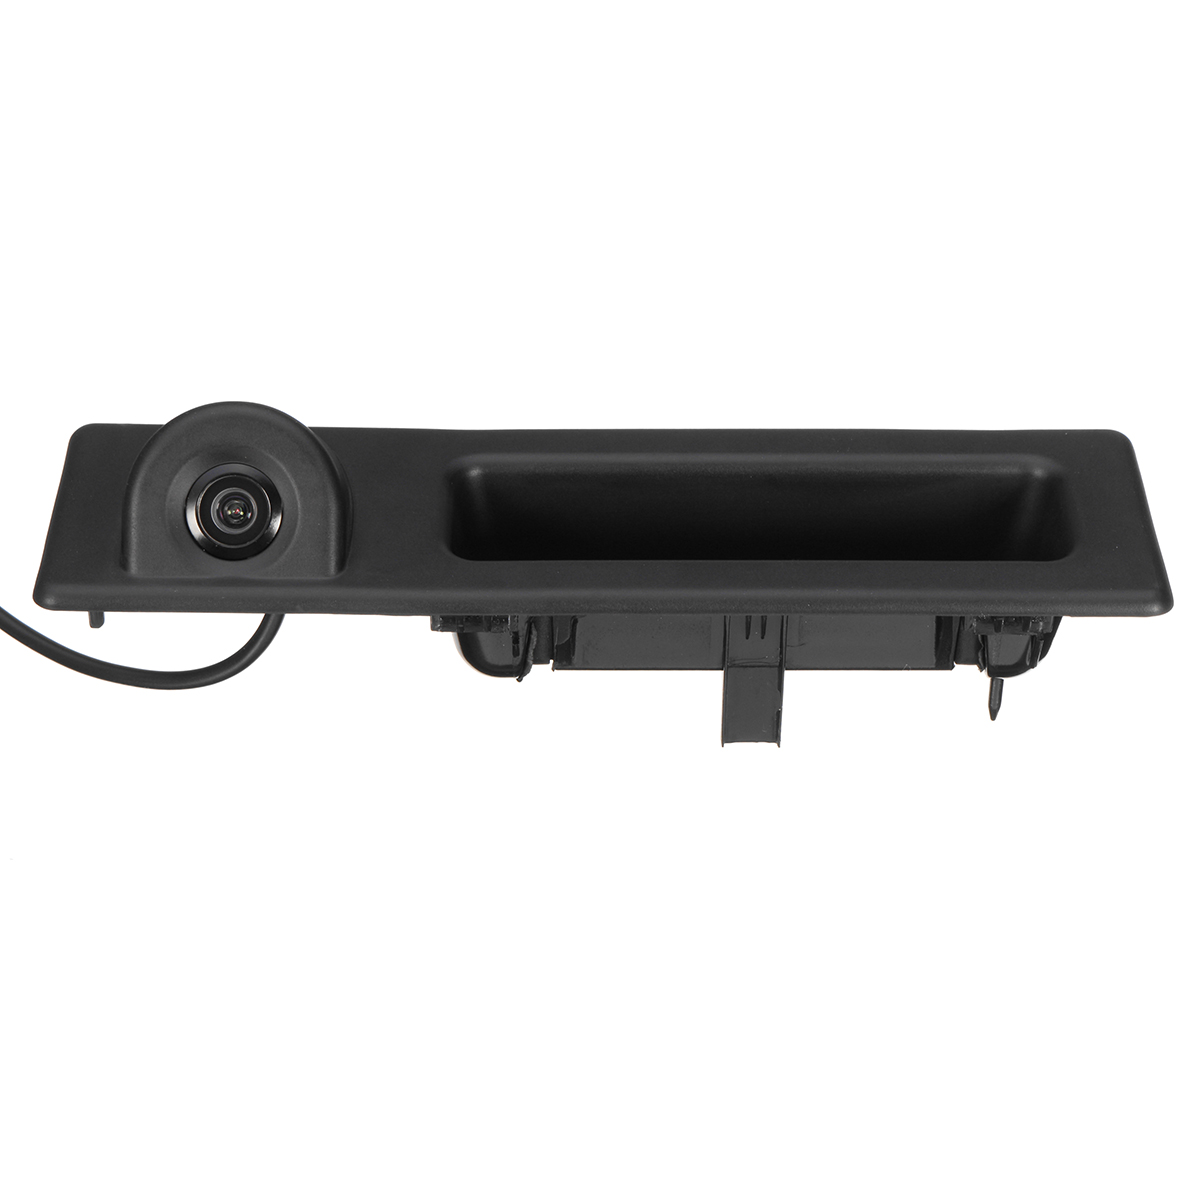 Car-Truck-Handle-CCD-Reversing-Rear-View-Camera-For-BMW-3-Series-F30-F31-F34-GT-1226421